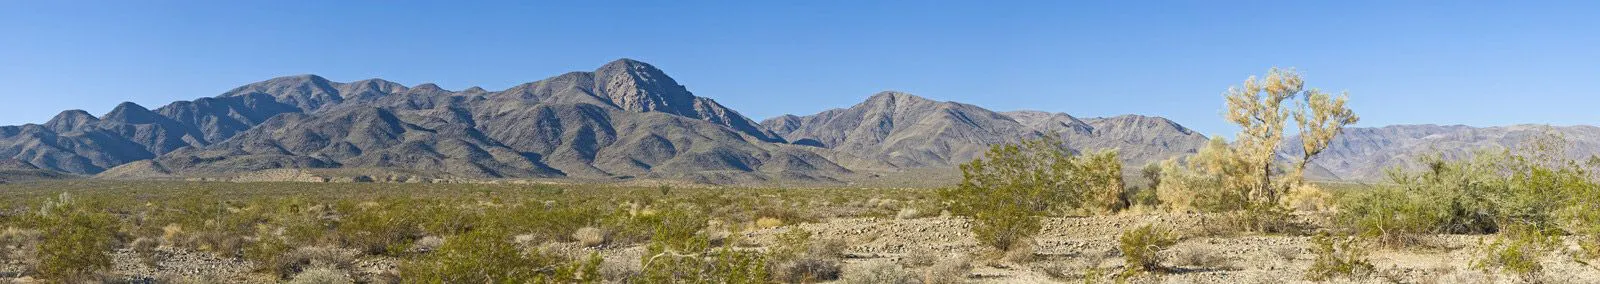 Coachella Valley landscape with mountains and desert